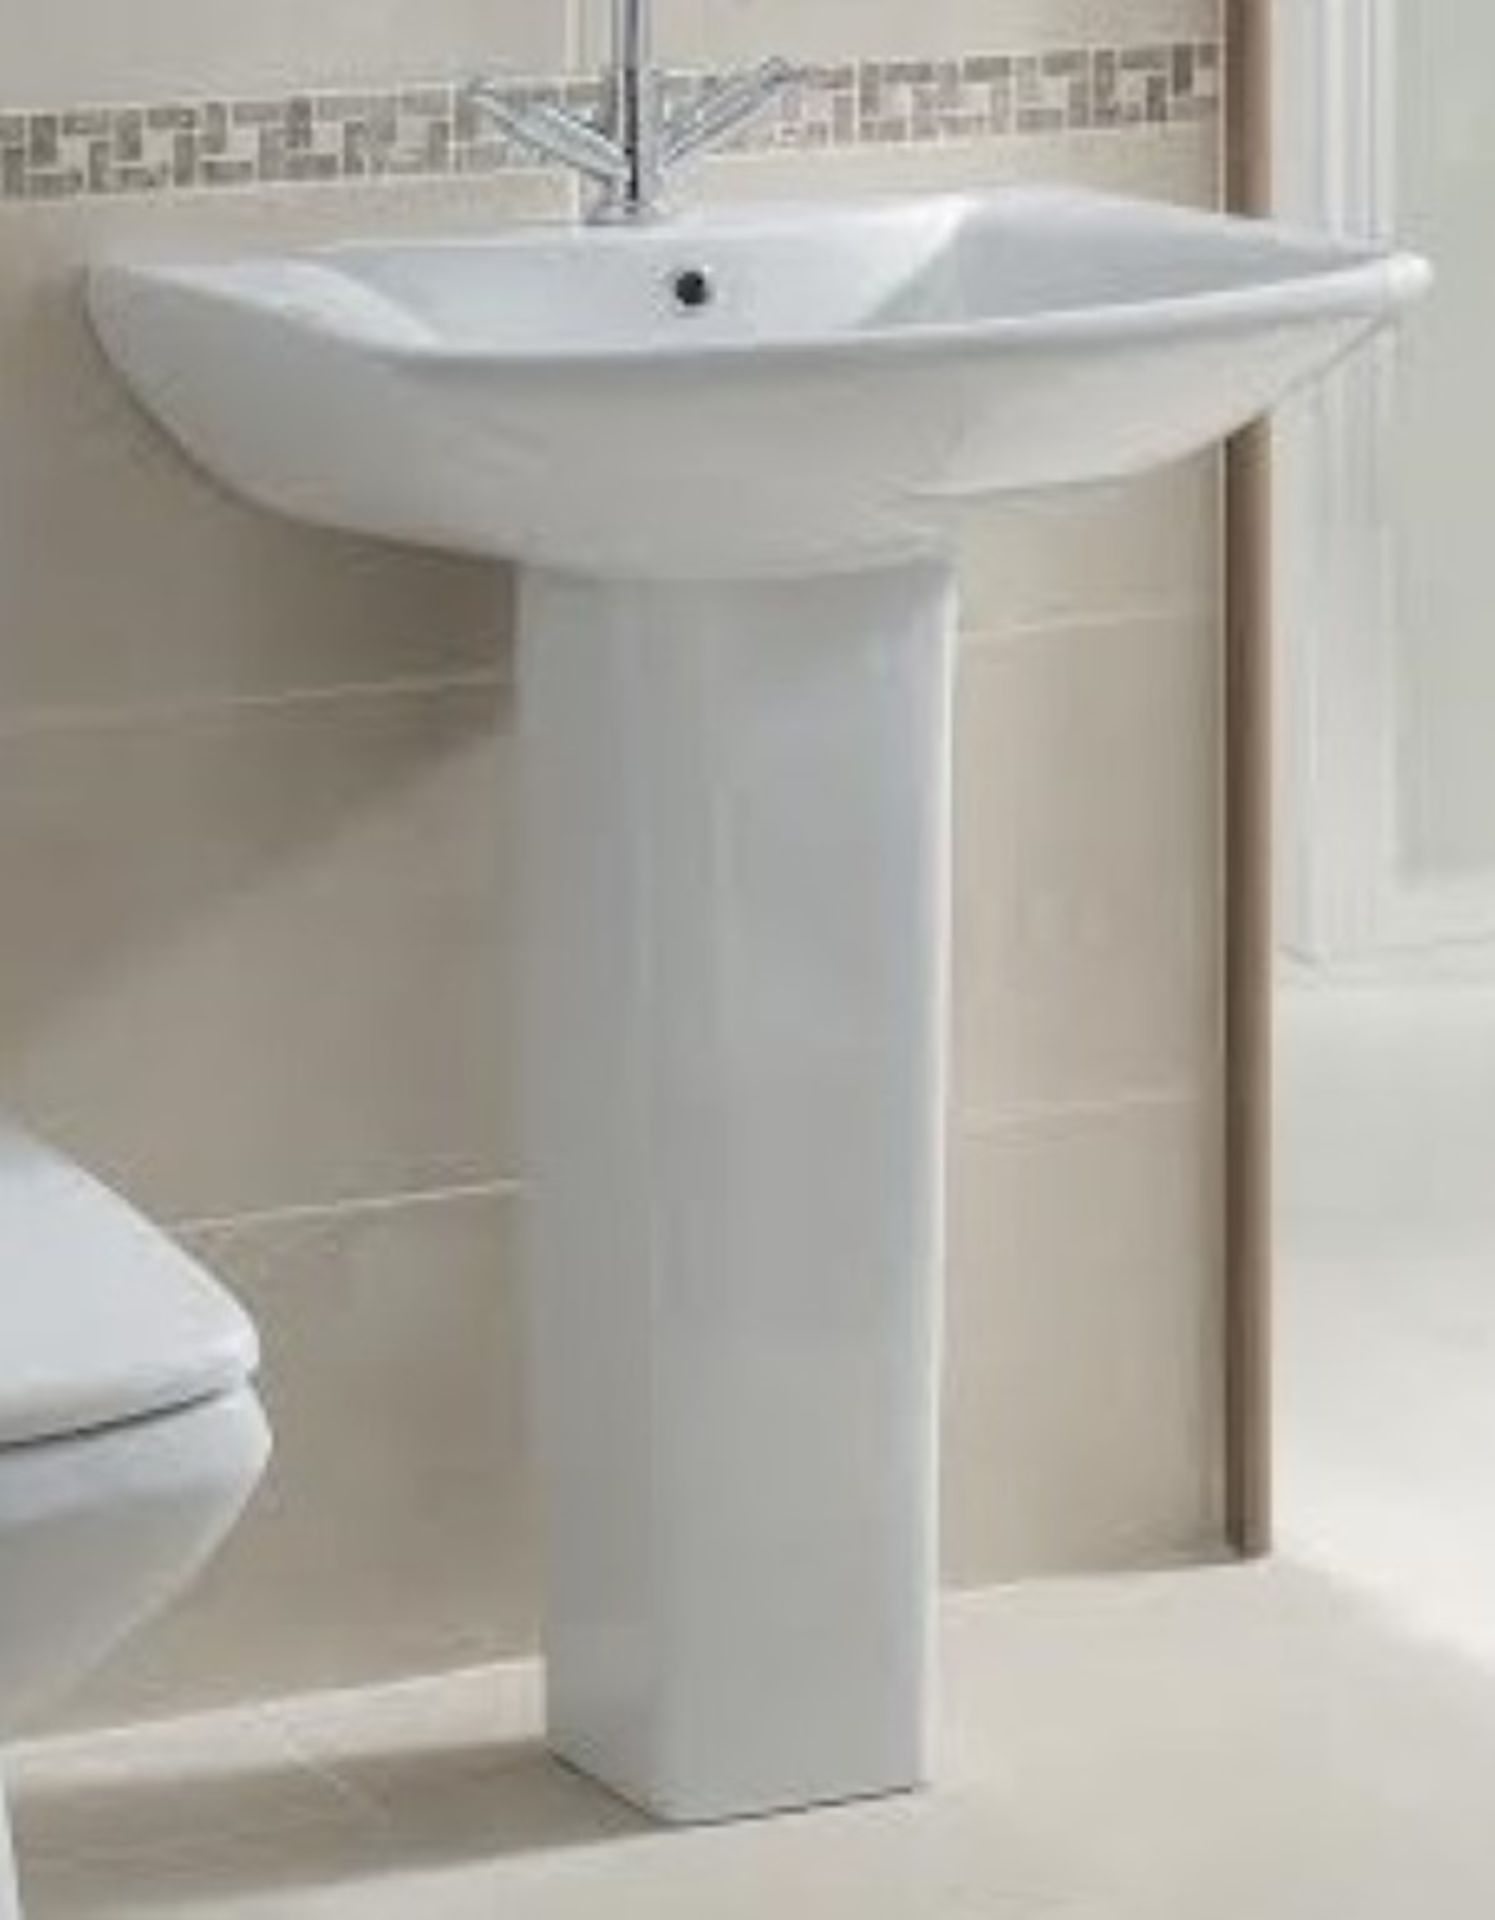 10 x Vogue Bathrooms CHEVRON Single Tap Hole SINK BASINS and Pedestals - 600mm Width - Brand New and